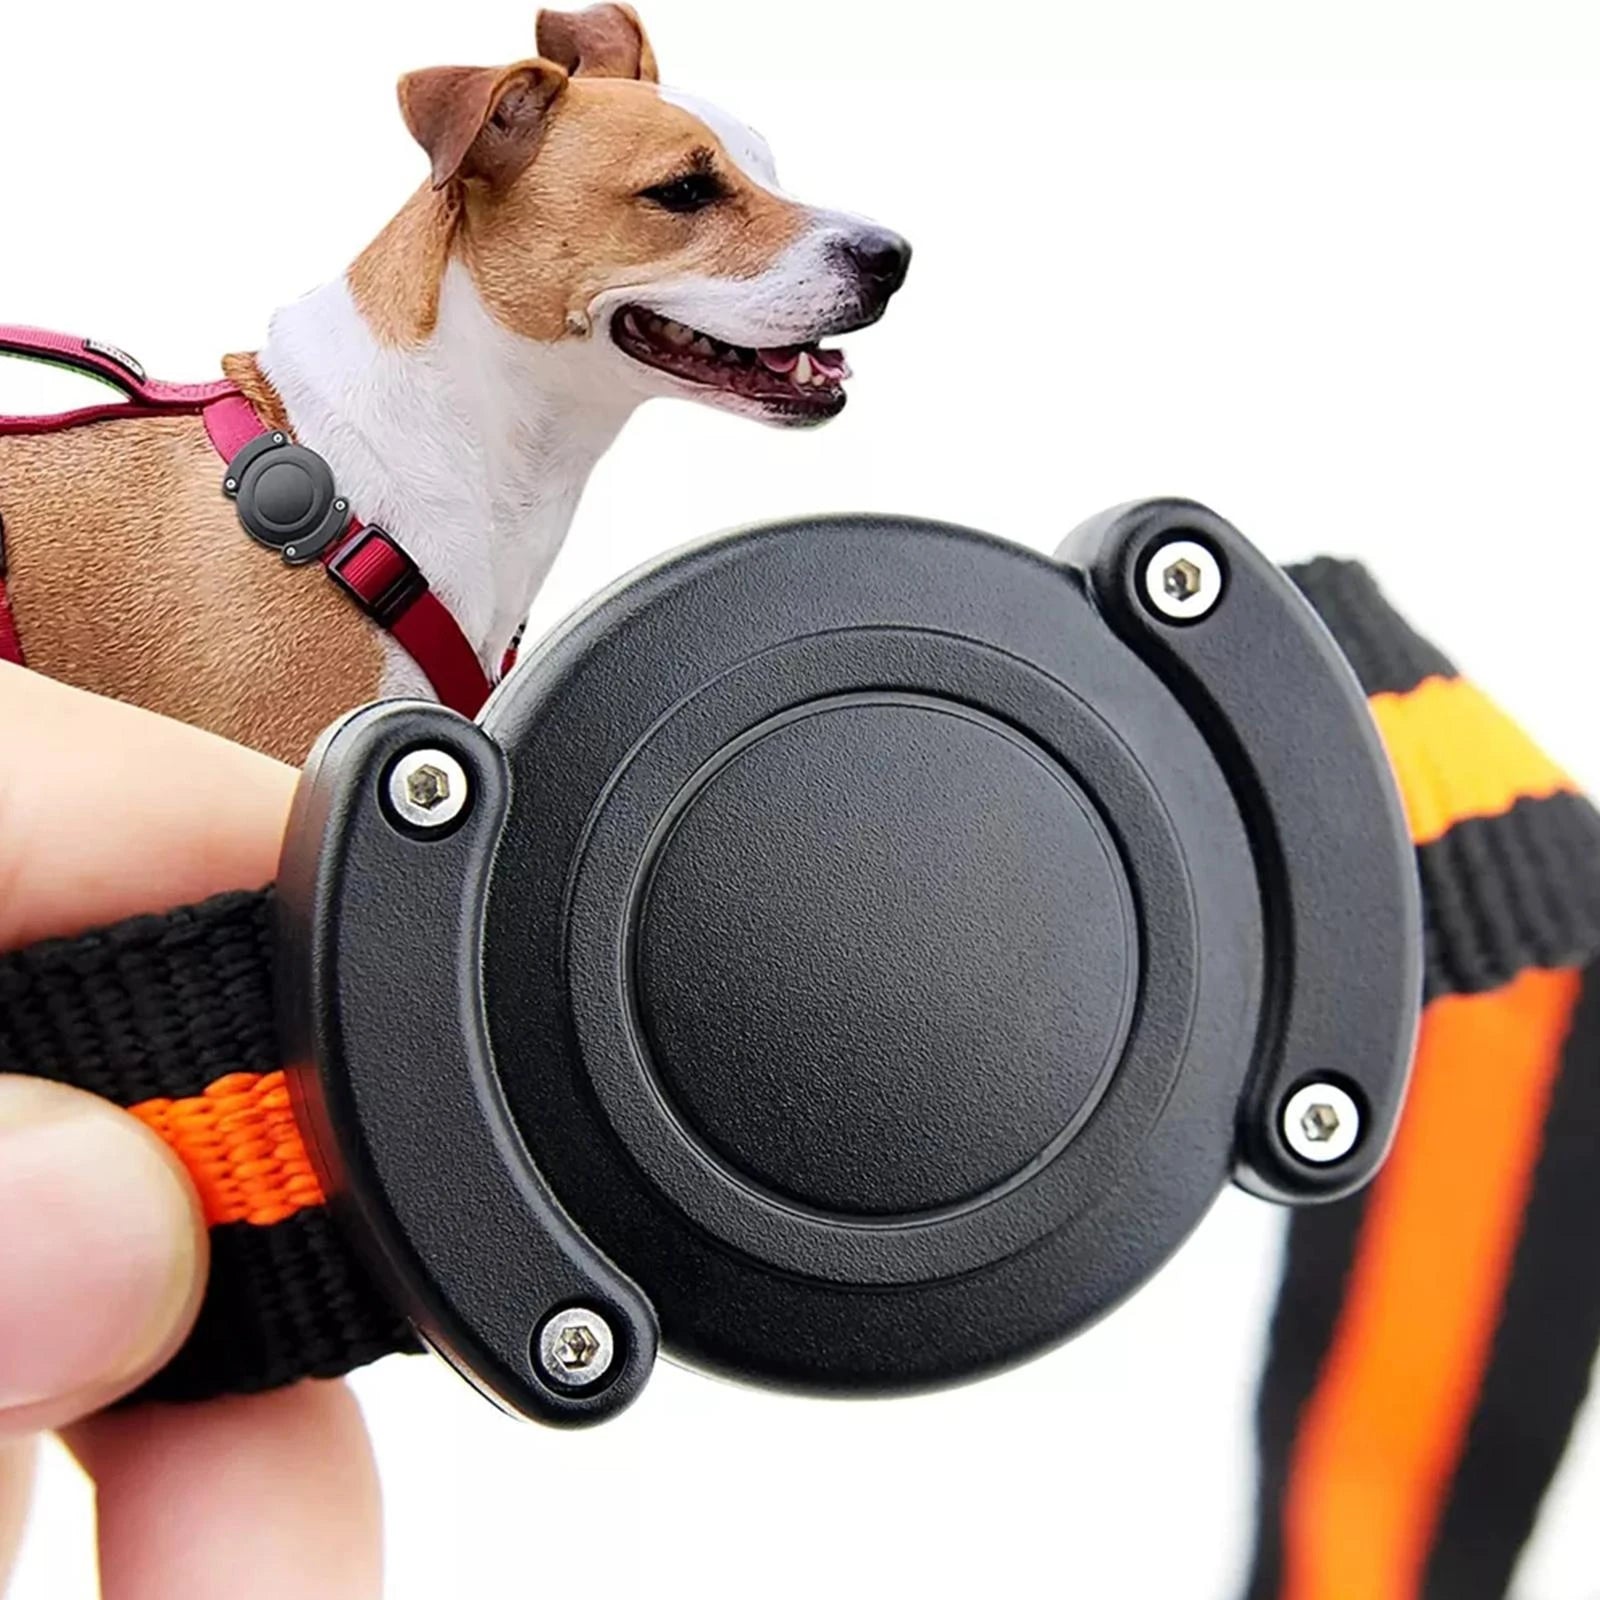 Anti-Scratch, Waterproof, and Portable Pet Case Keychain Tracker